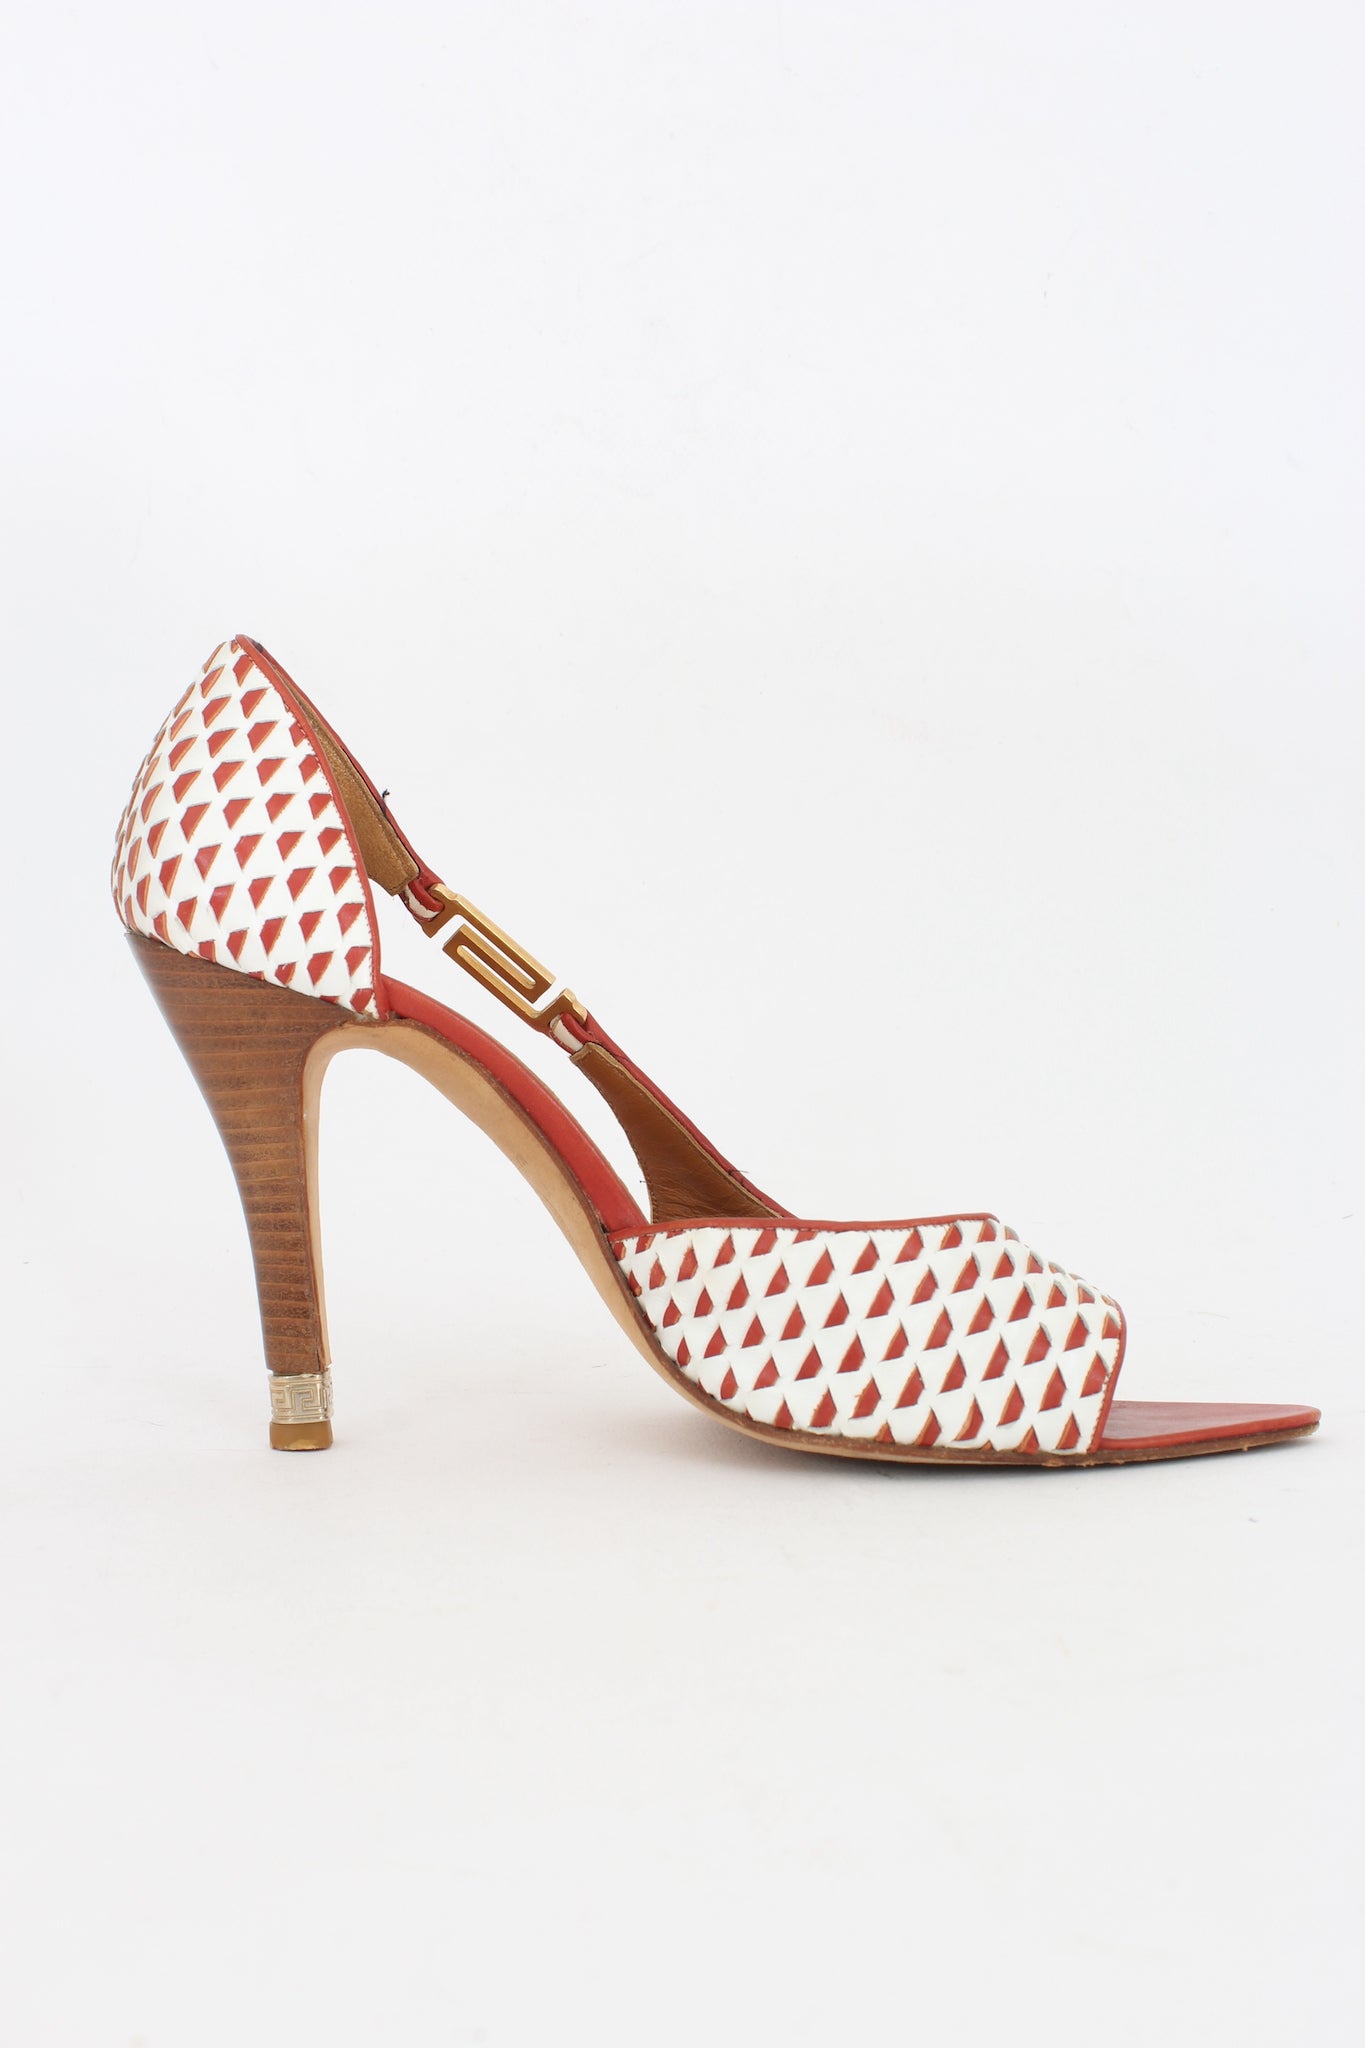 Versace Leather Red Check Vintage Heel Shoes 90s